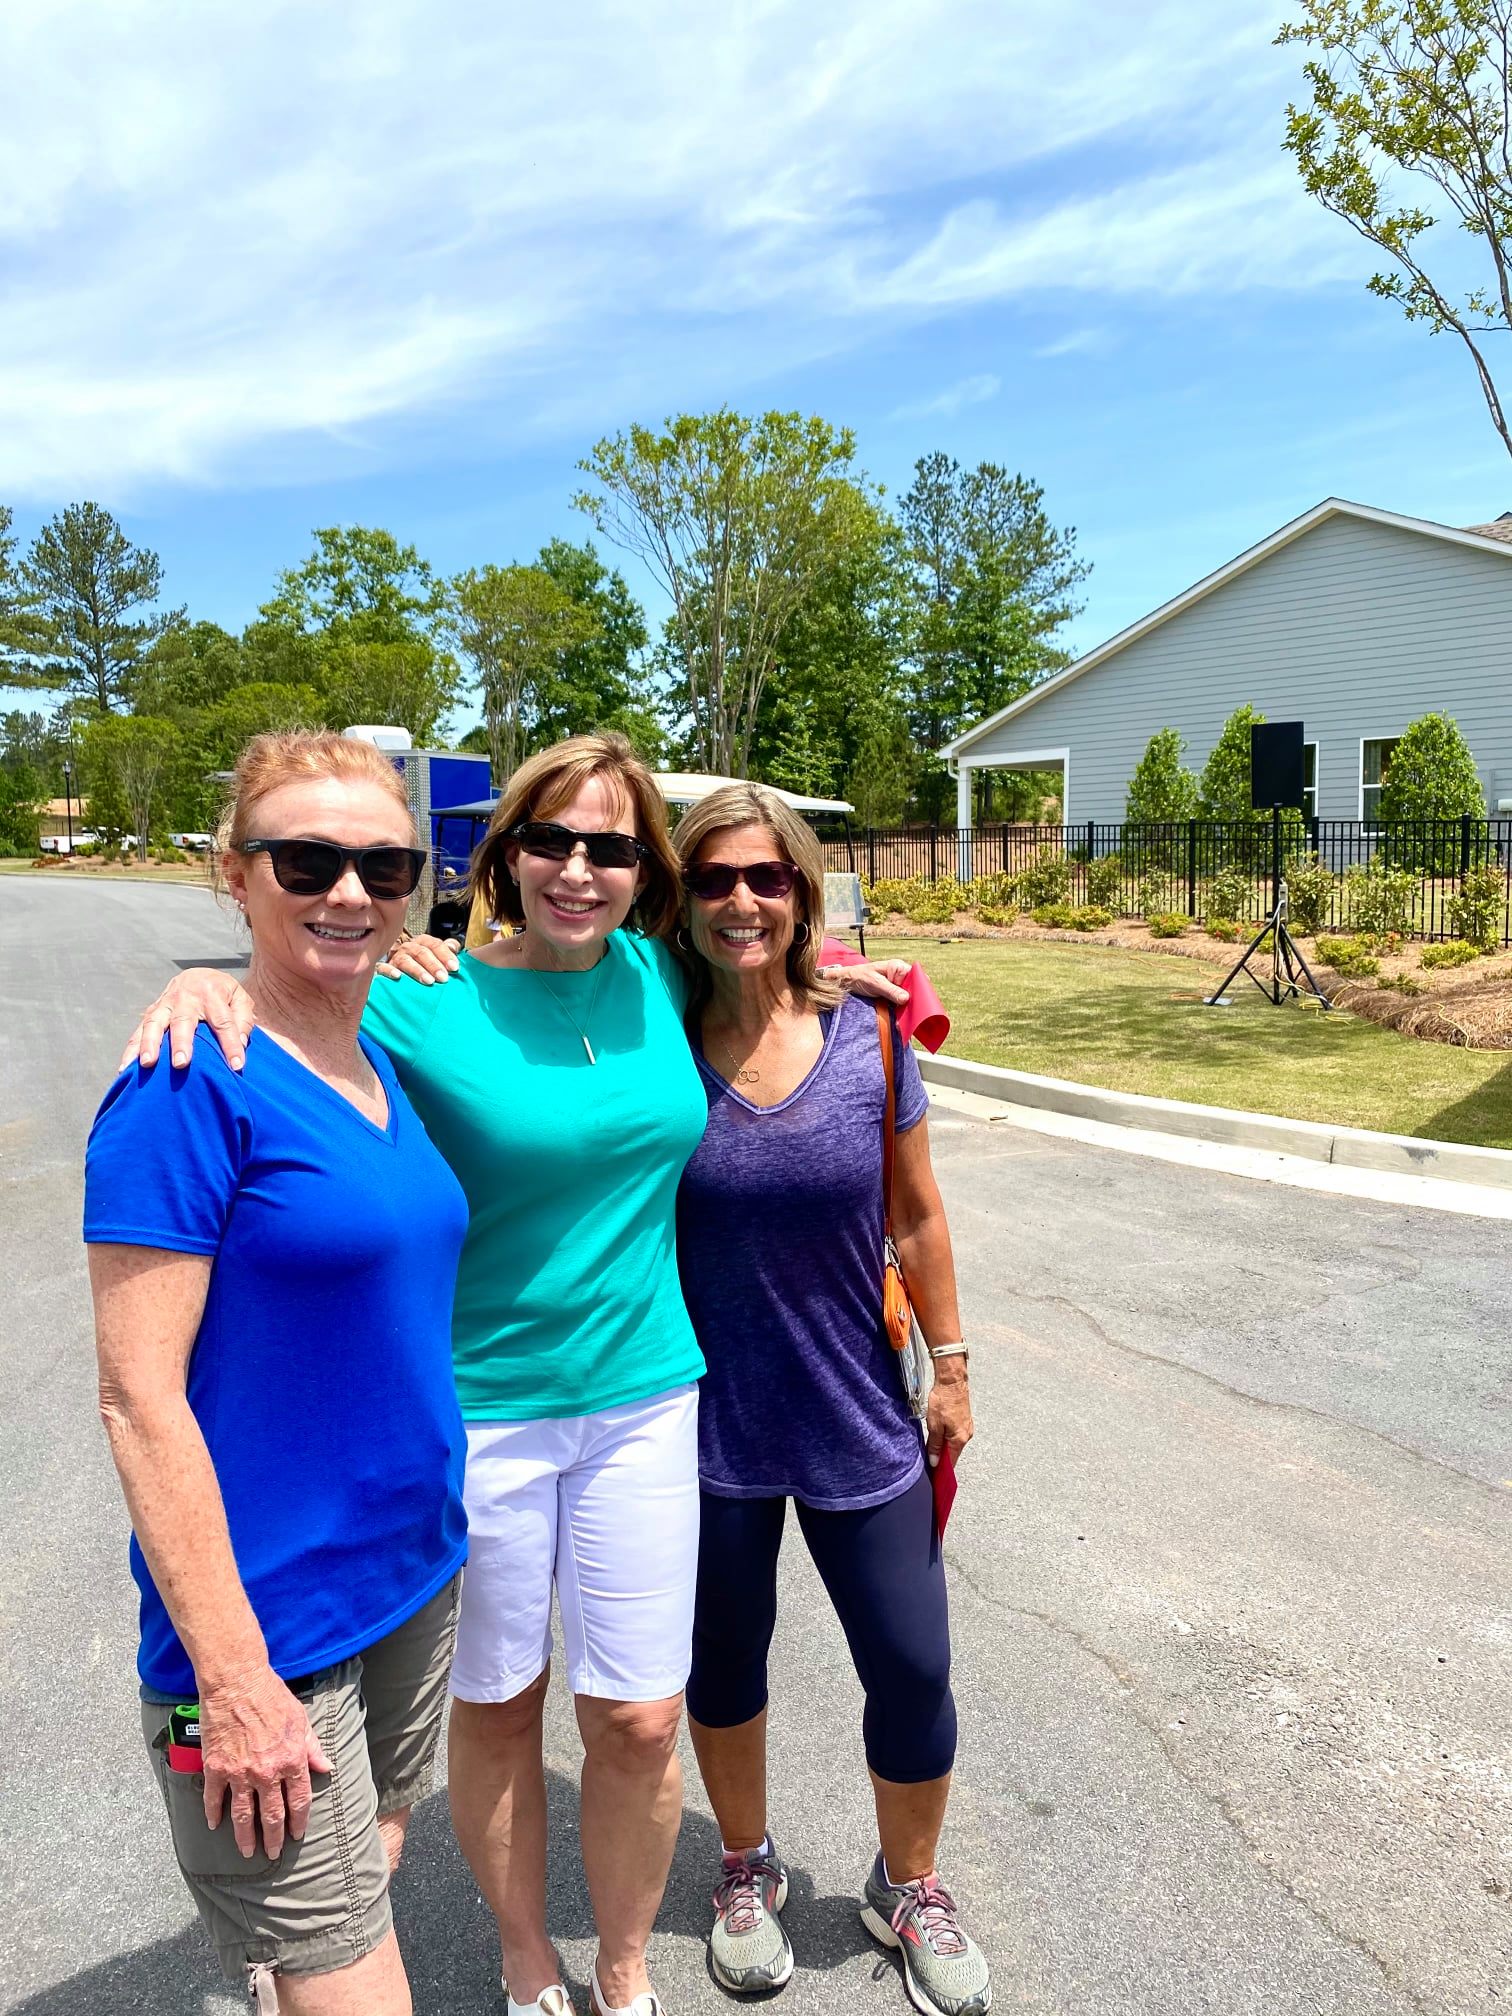 Cresswind Georgia residents posing and smiling at Hoschton Day in front of the model home park